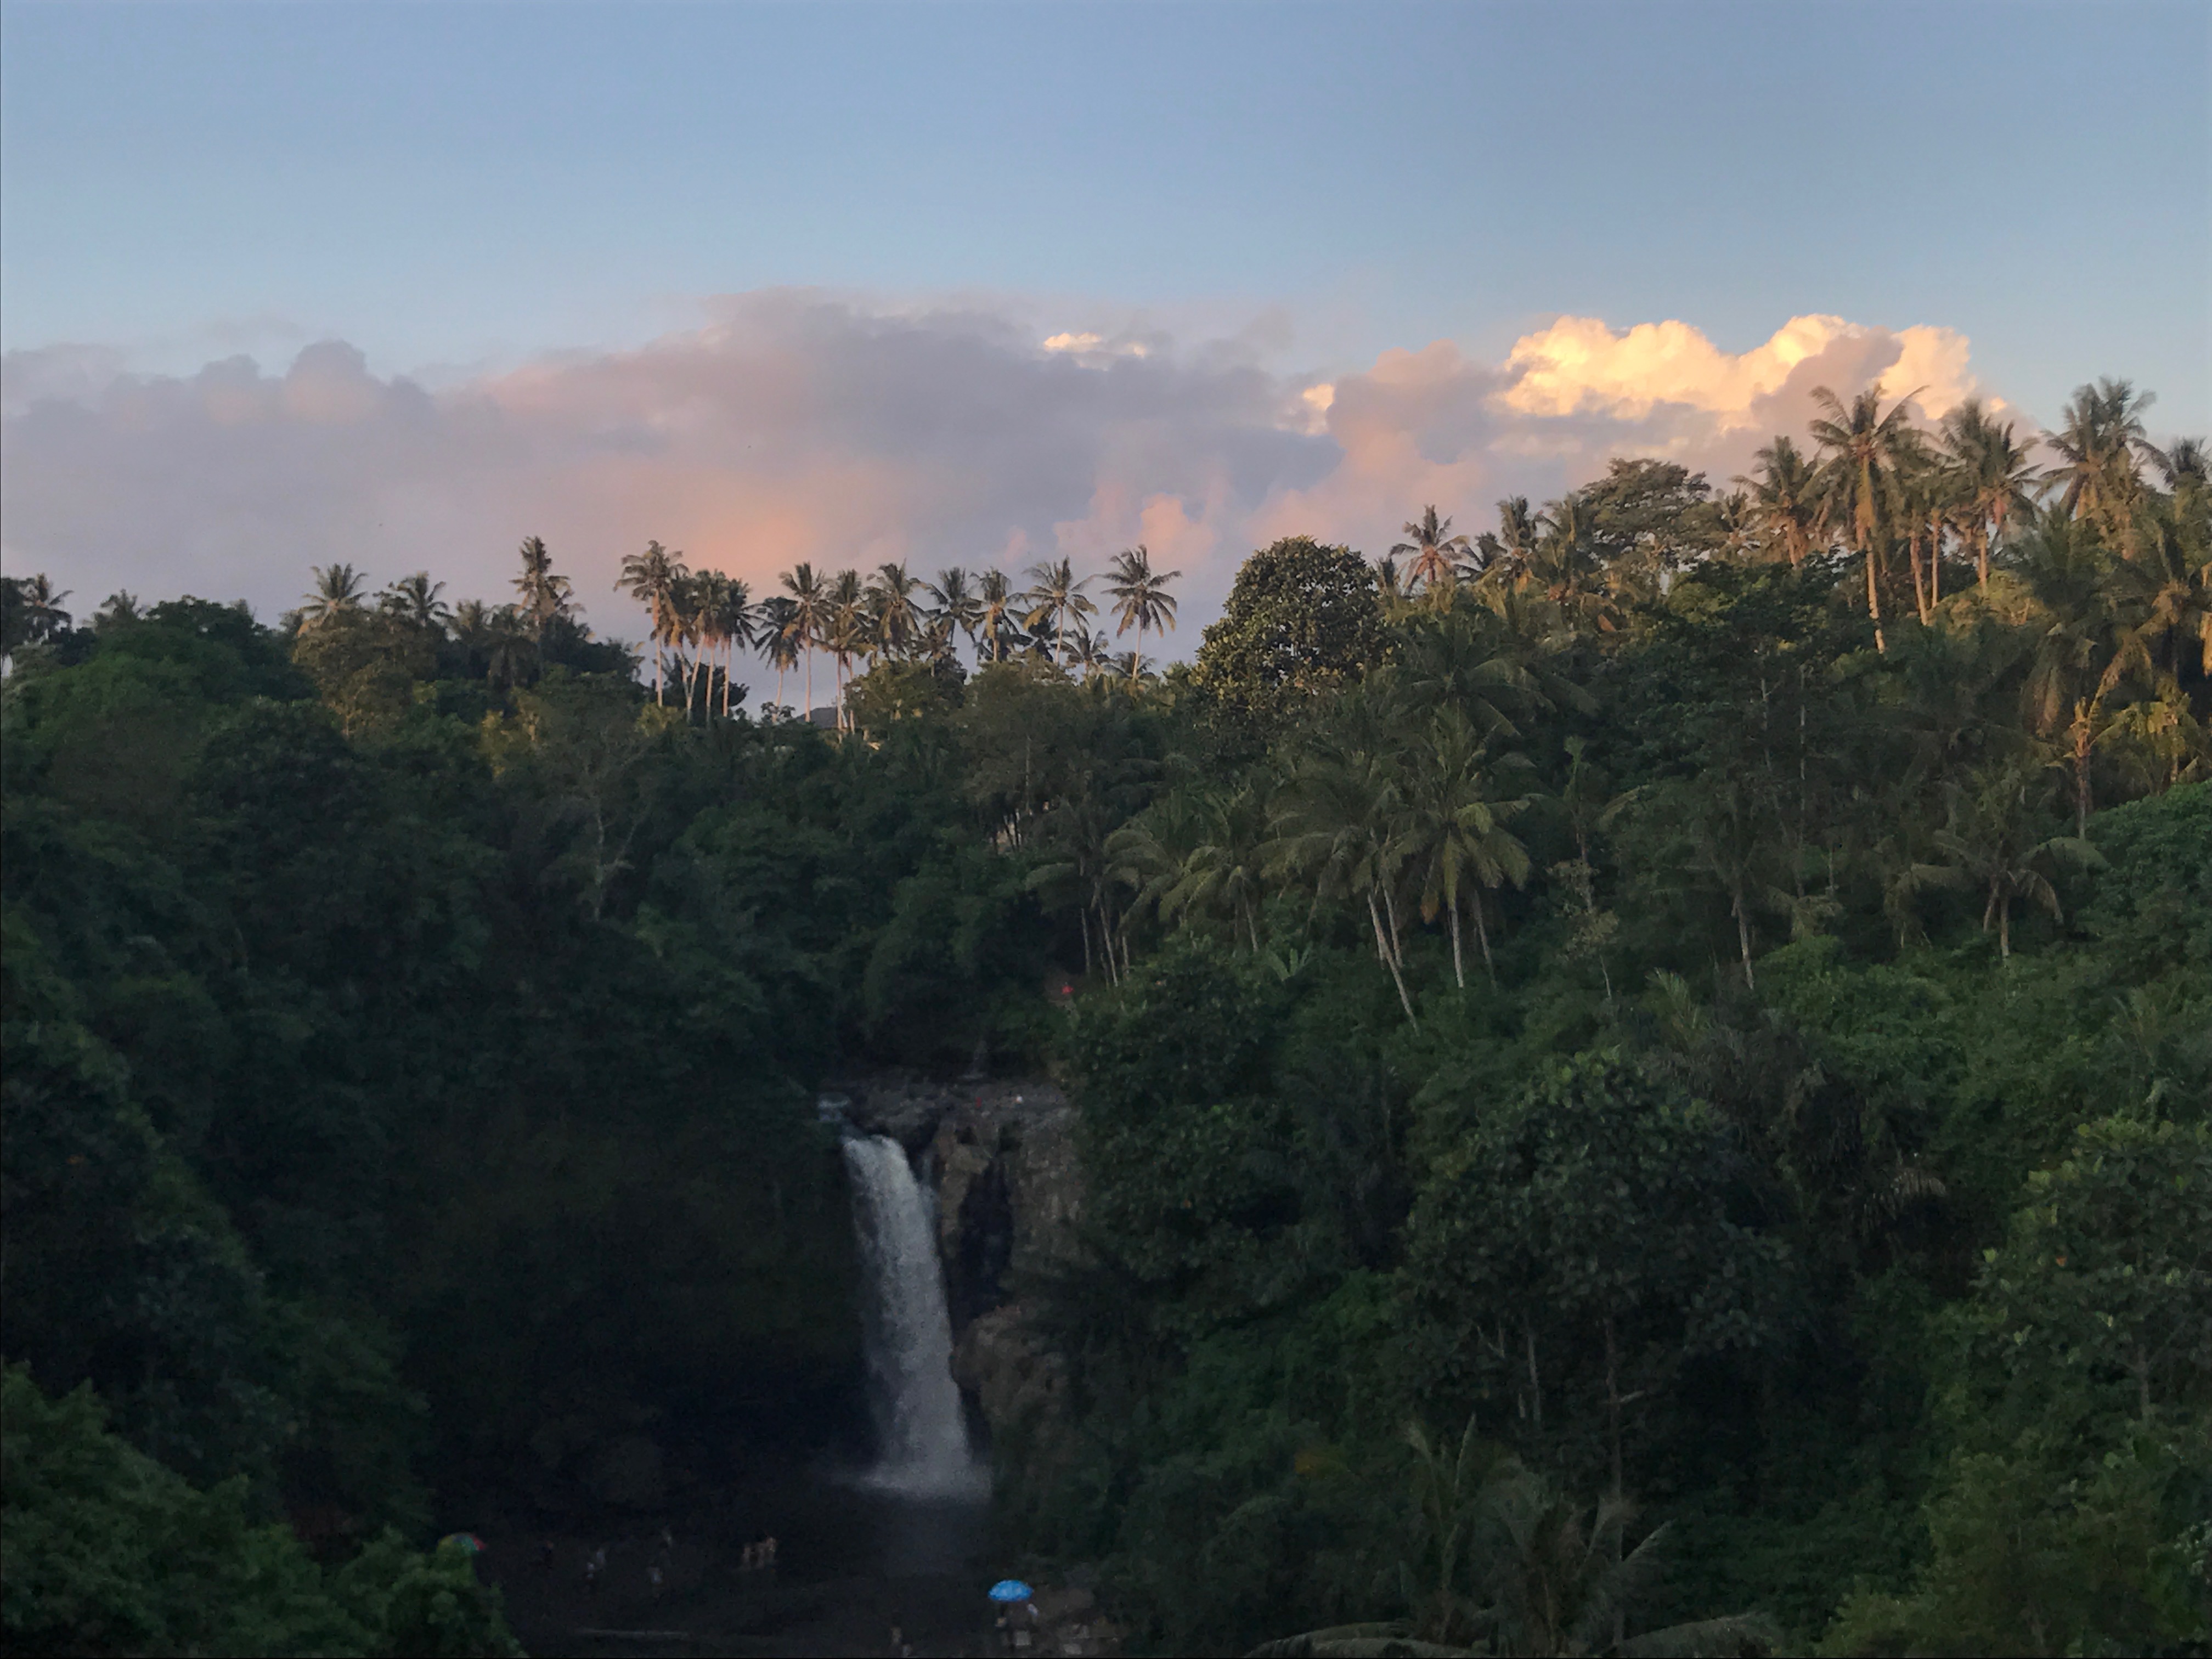 A Weekend In: Ubud, Bali, Indonesia - Culture, Beauty, and Nature